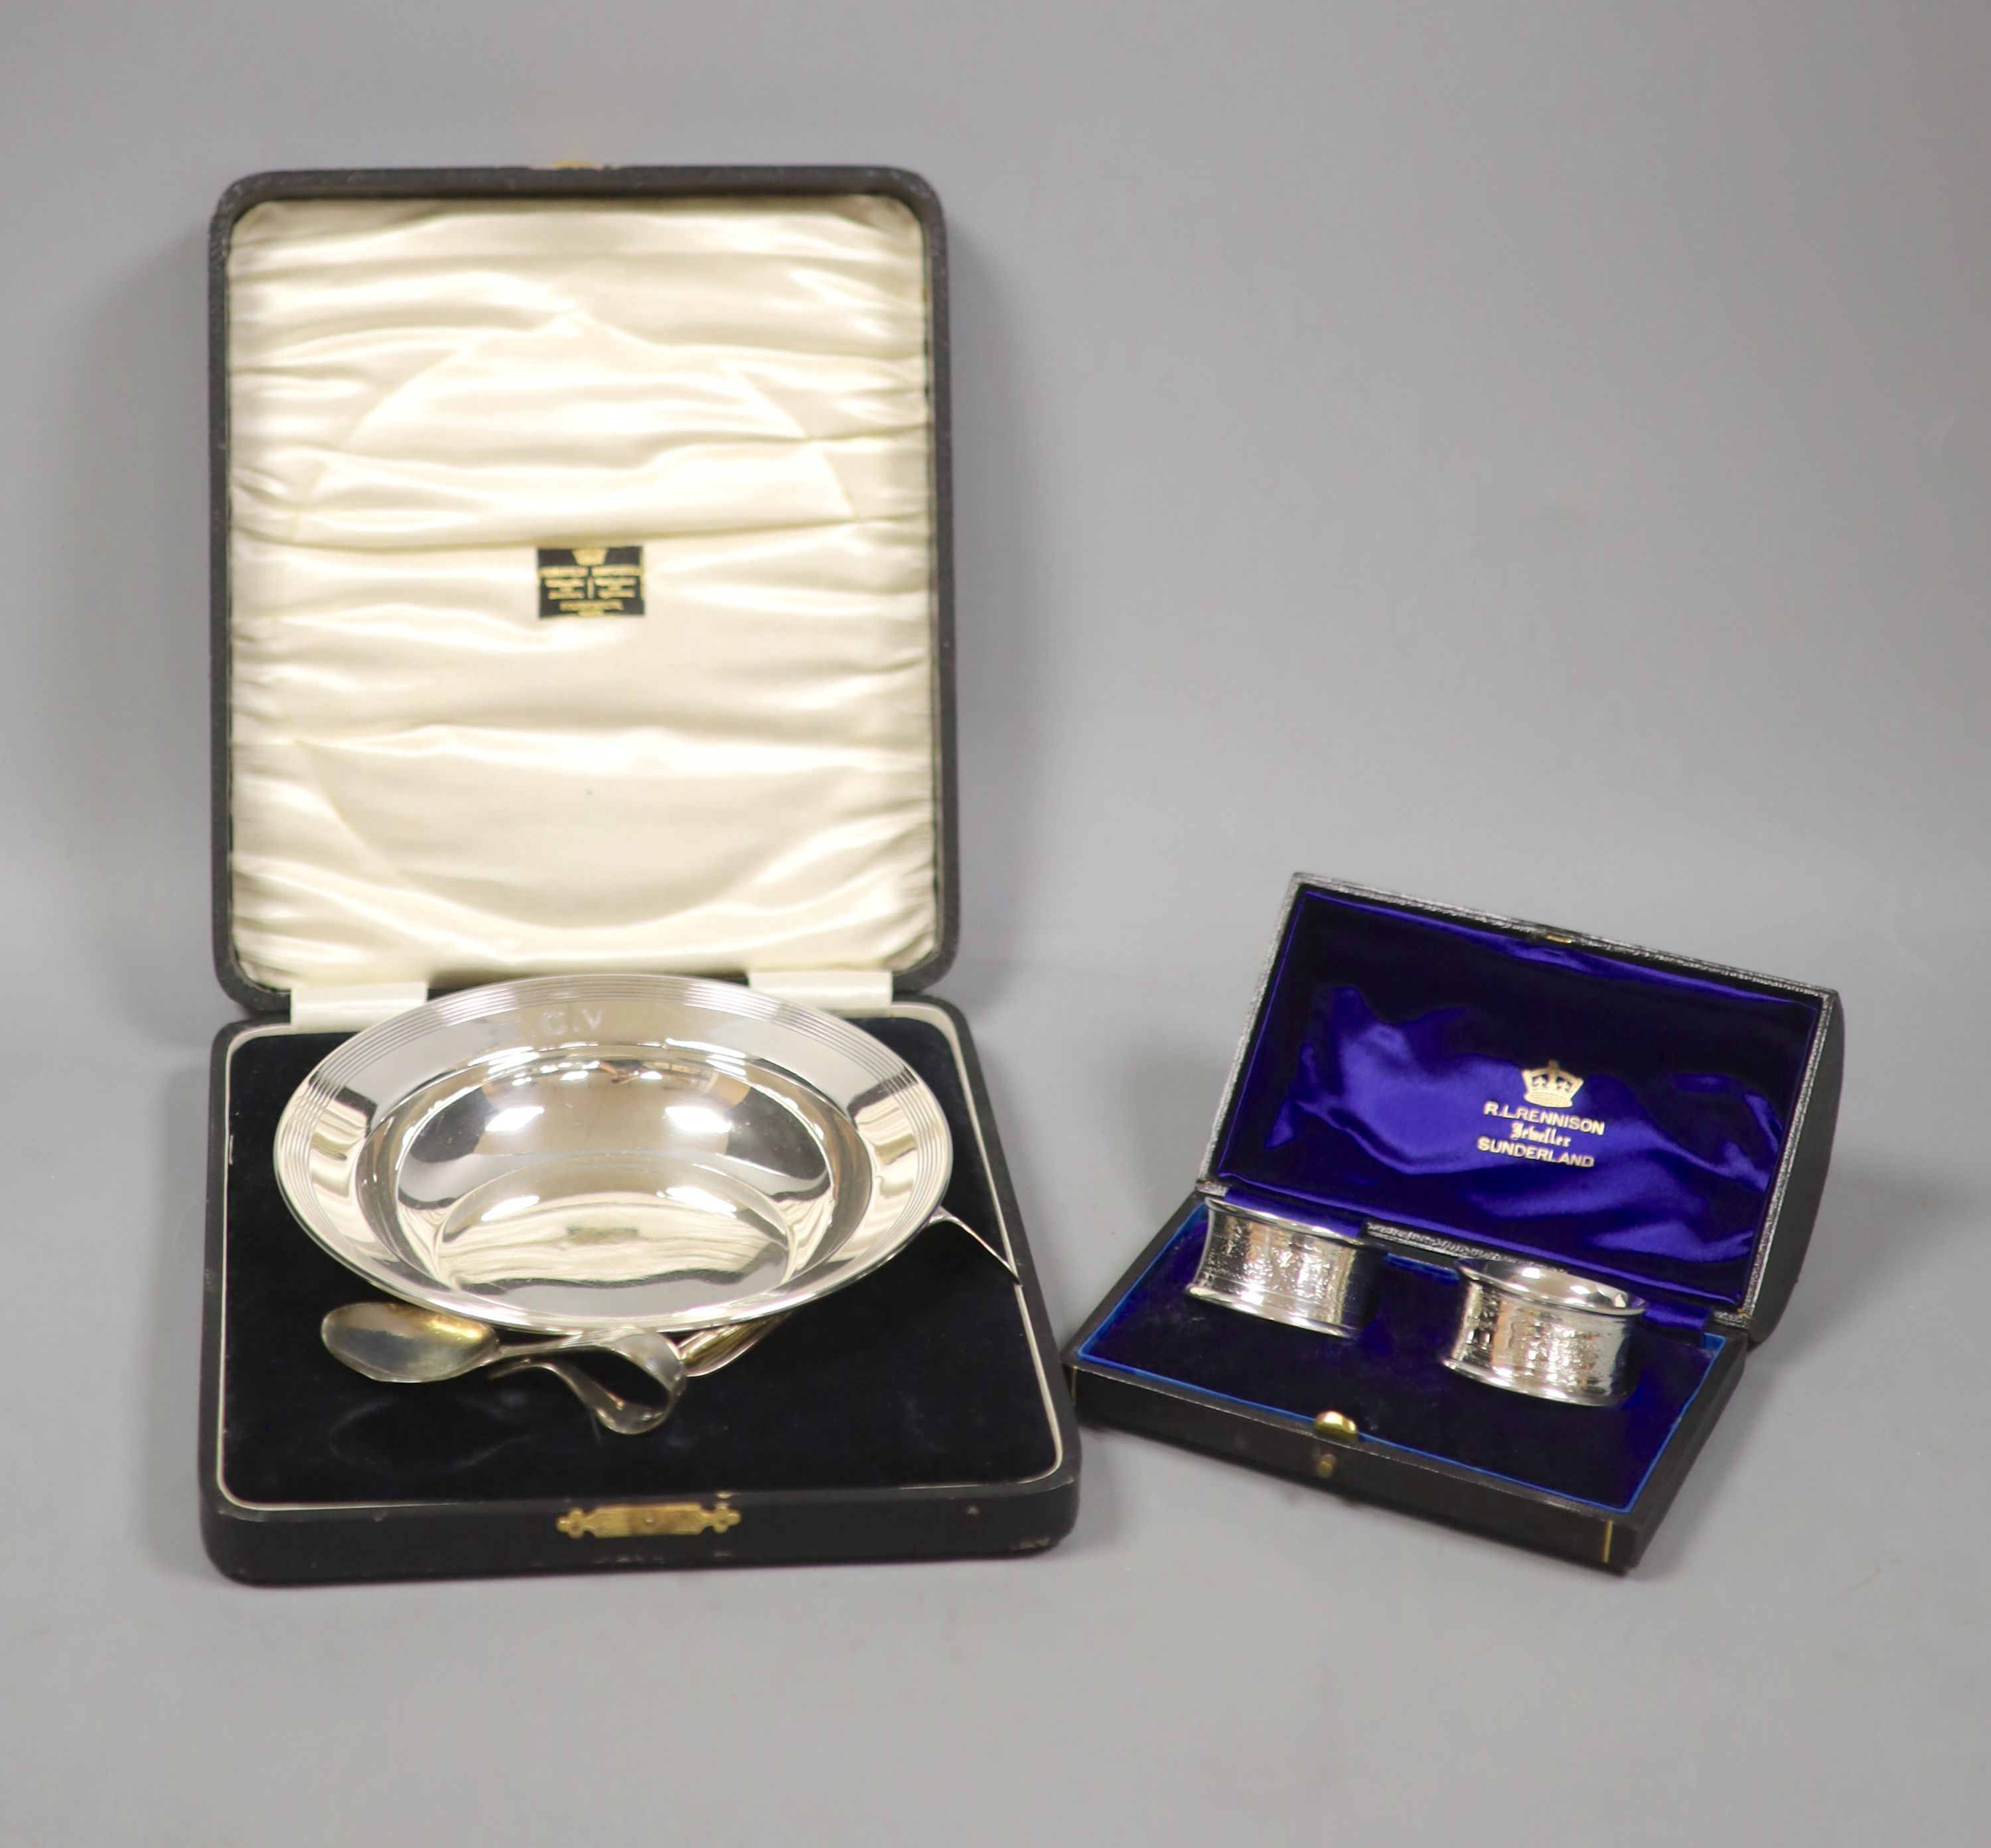 A cased christening dish with associated pusher and spoon, together with a cased pair of silver napkin rings.